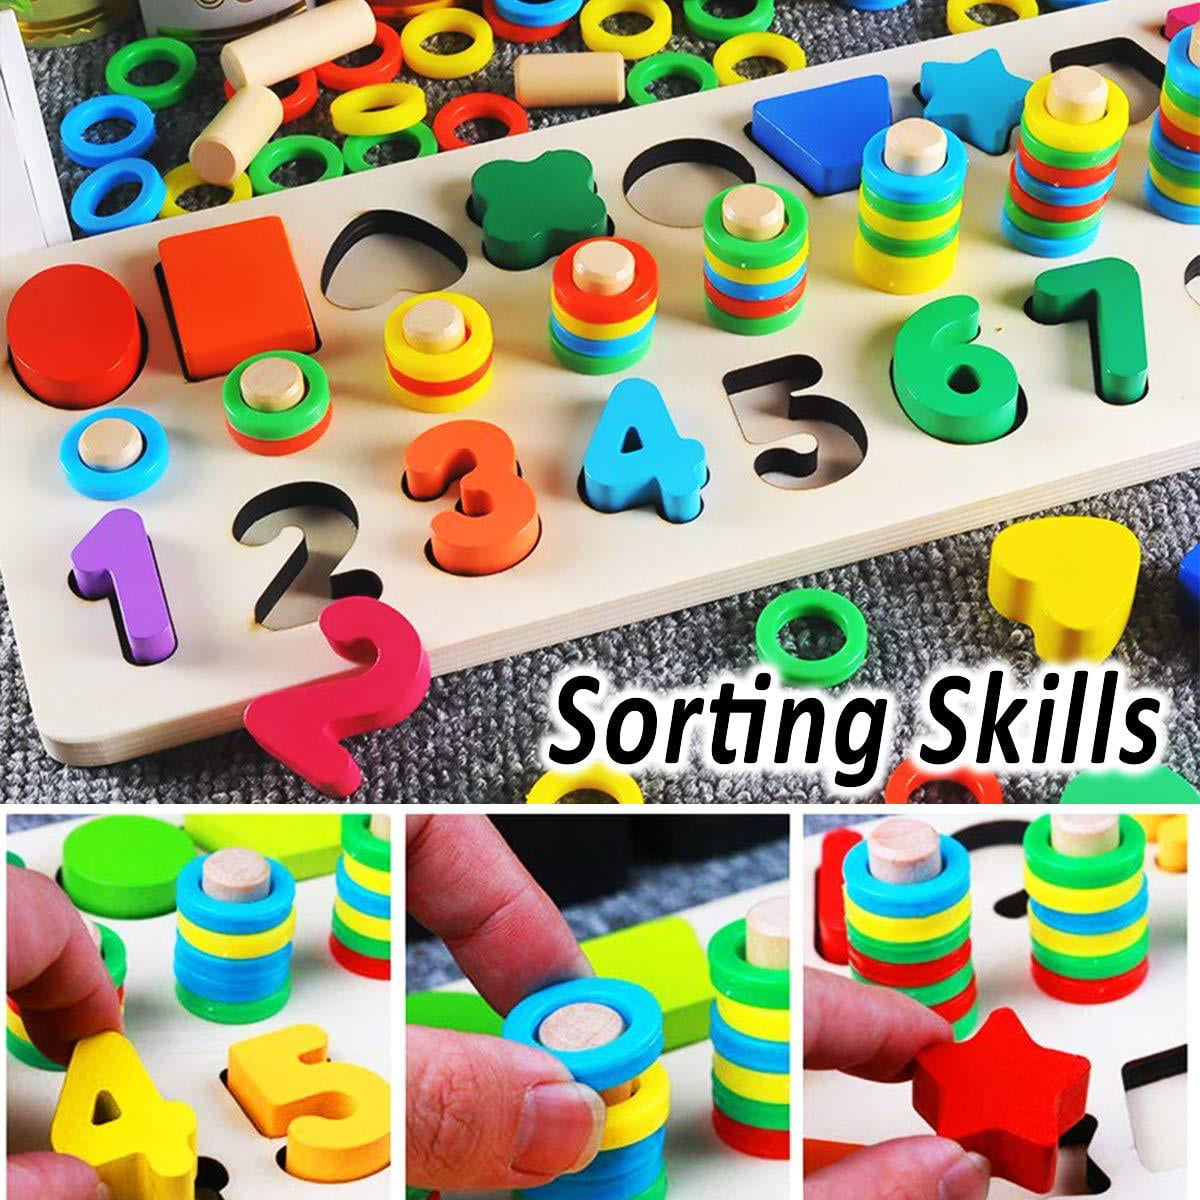 Shape Sorter Counting Game for Age 3 4 5 Year olds Kids CozyBomB Wooden Number Puzzle Sorting Montessori Toys for Toddlers Preschool Education Math Stacking Block Learning Wood Chunky Jigsaw